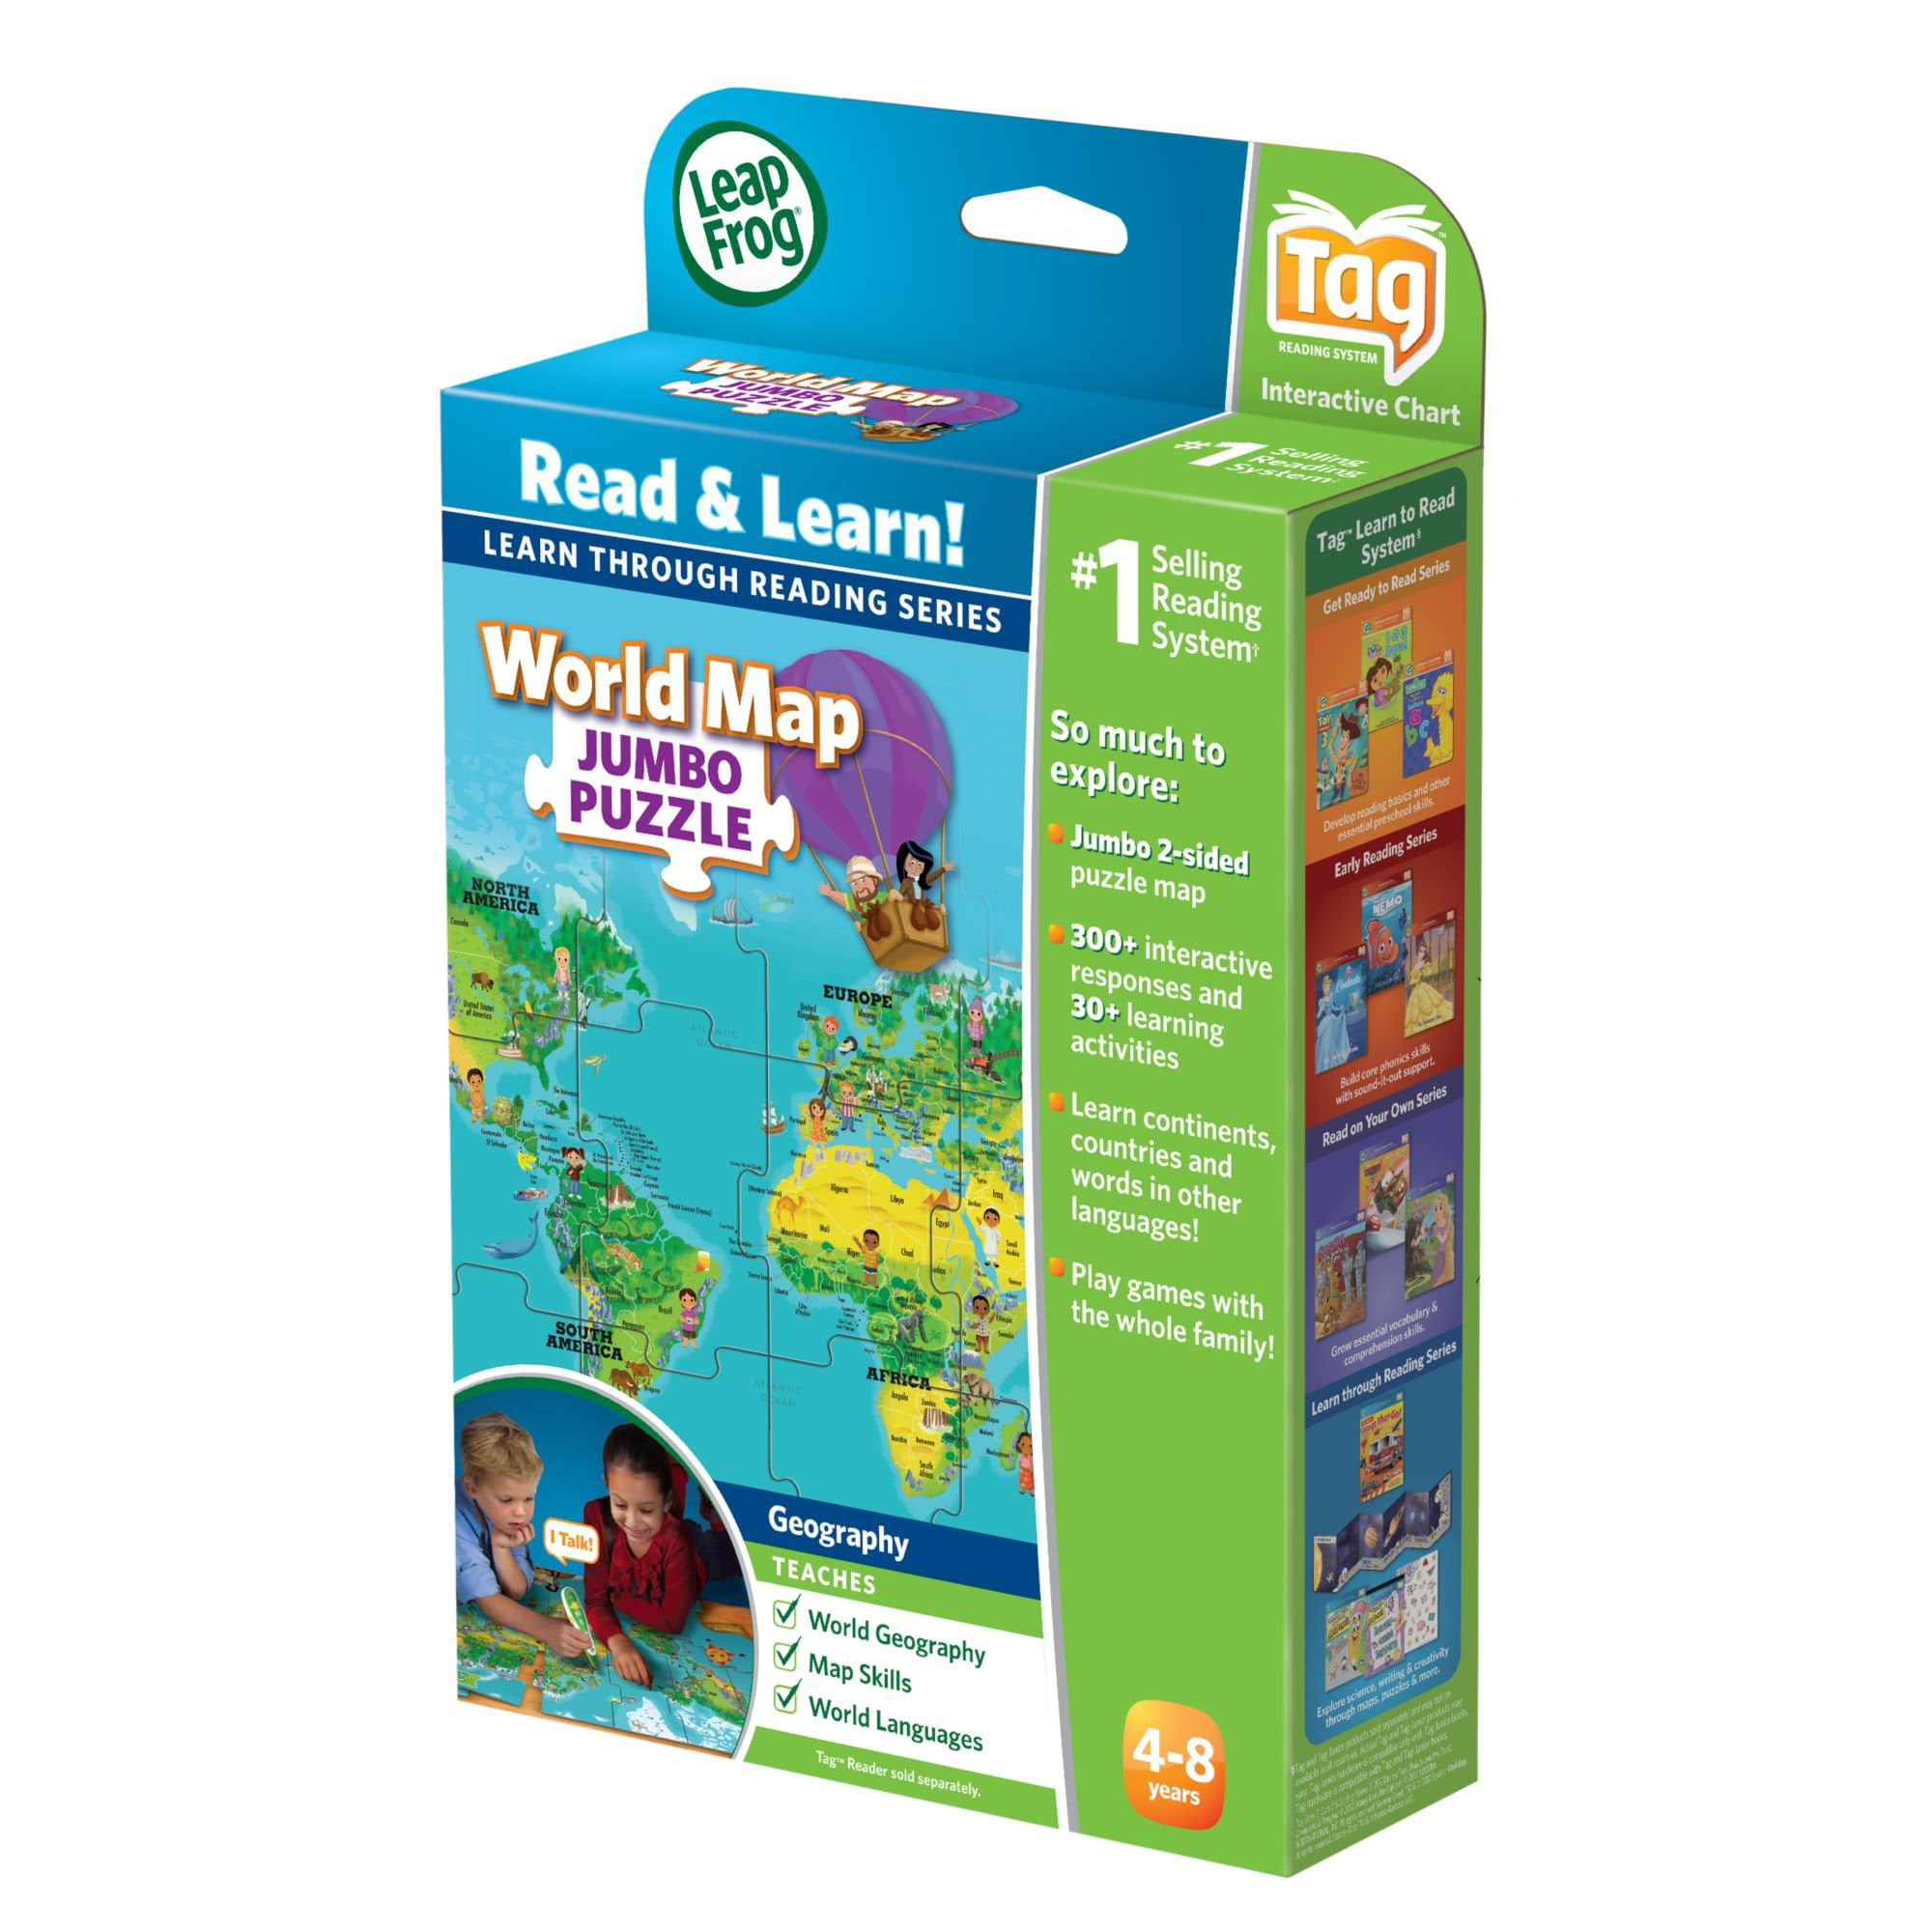 Factory sealed BRAND NEW LeapFrog LeapReader Interactive World Map Puzzle 